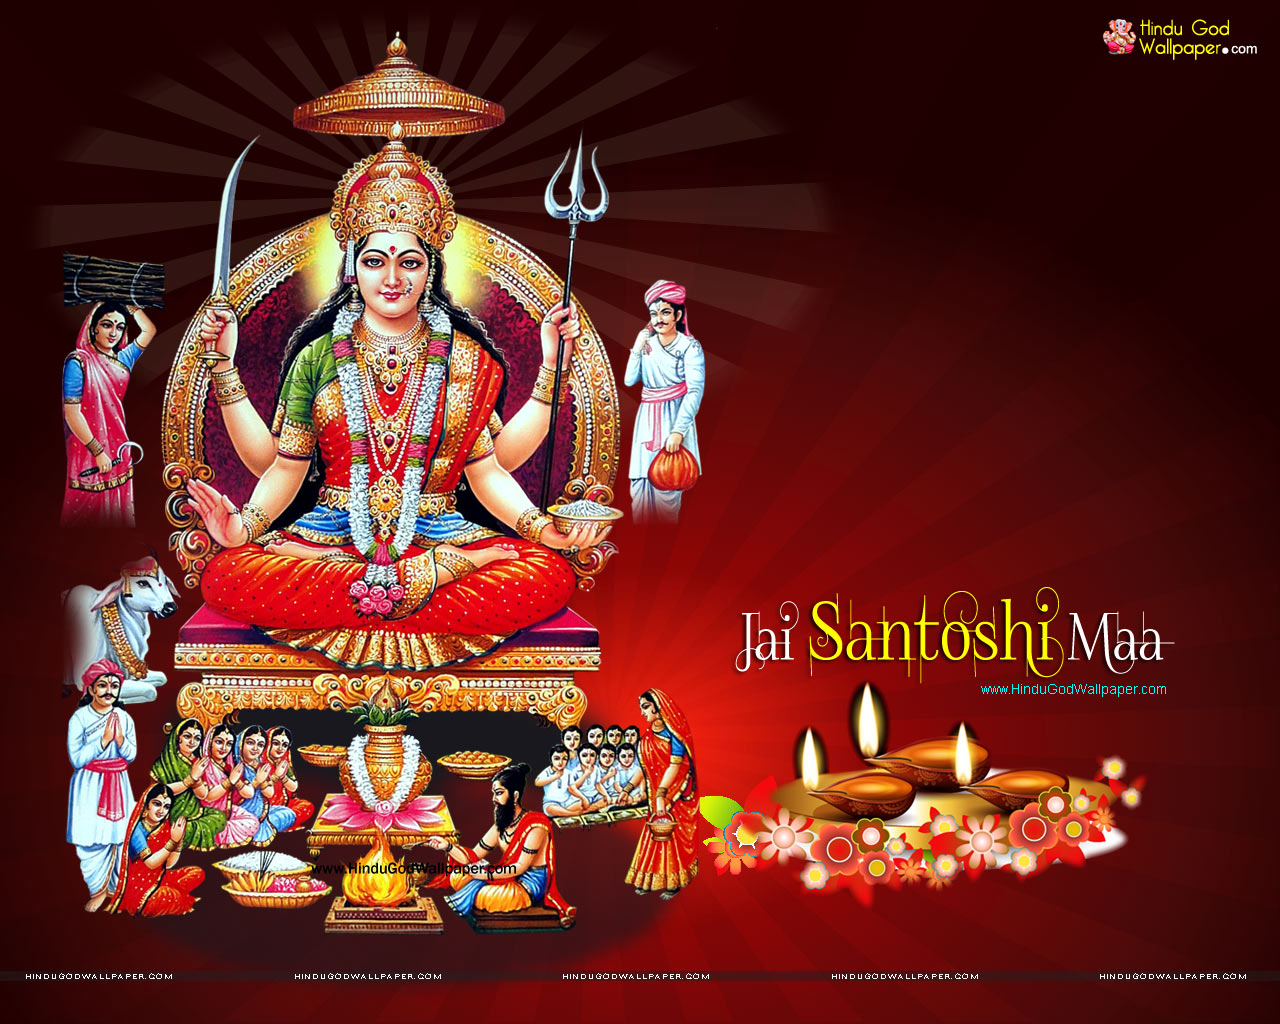 Santoshi Maa Wallpapers, Pictures & Images Download